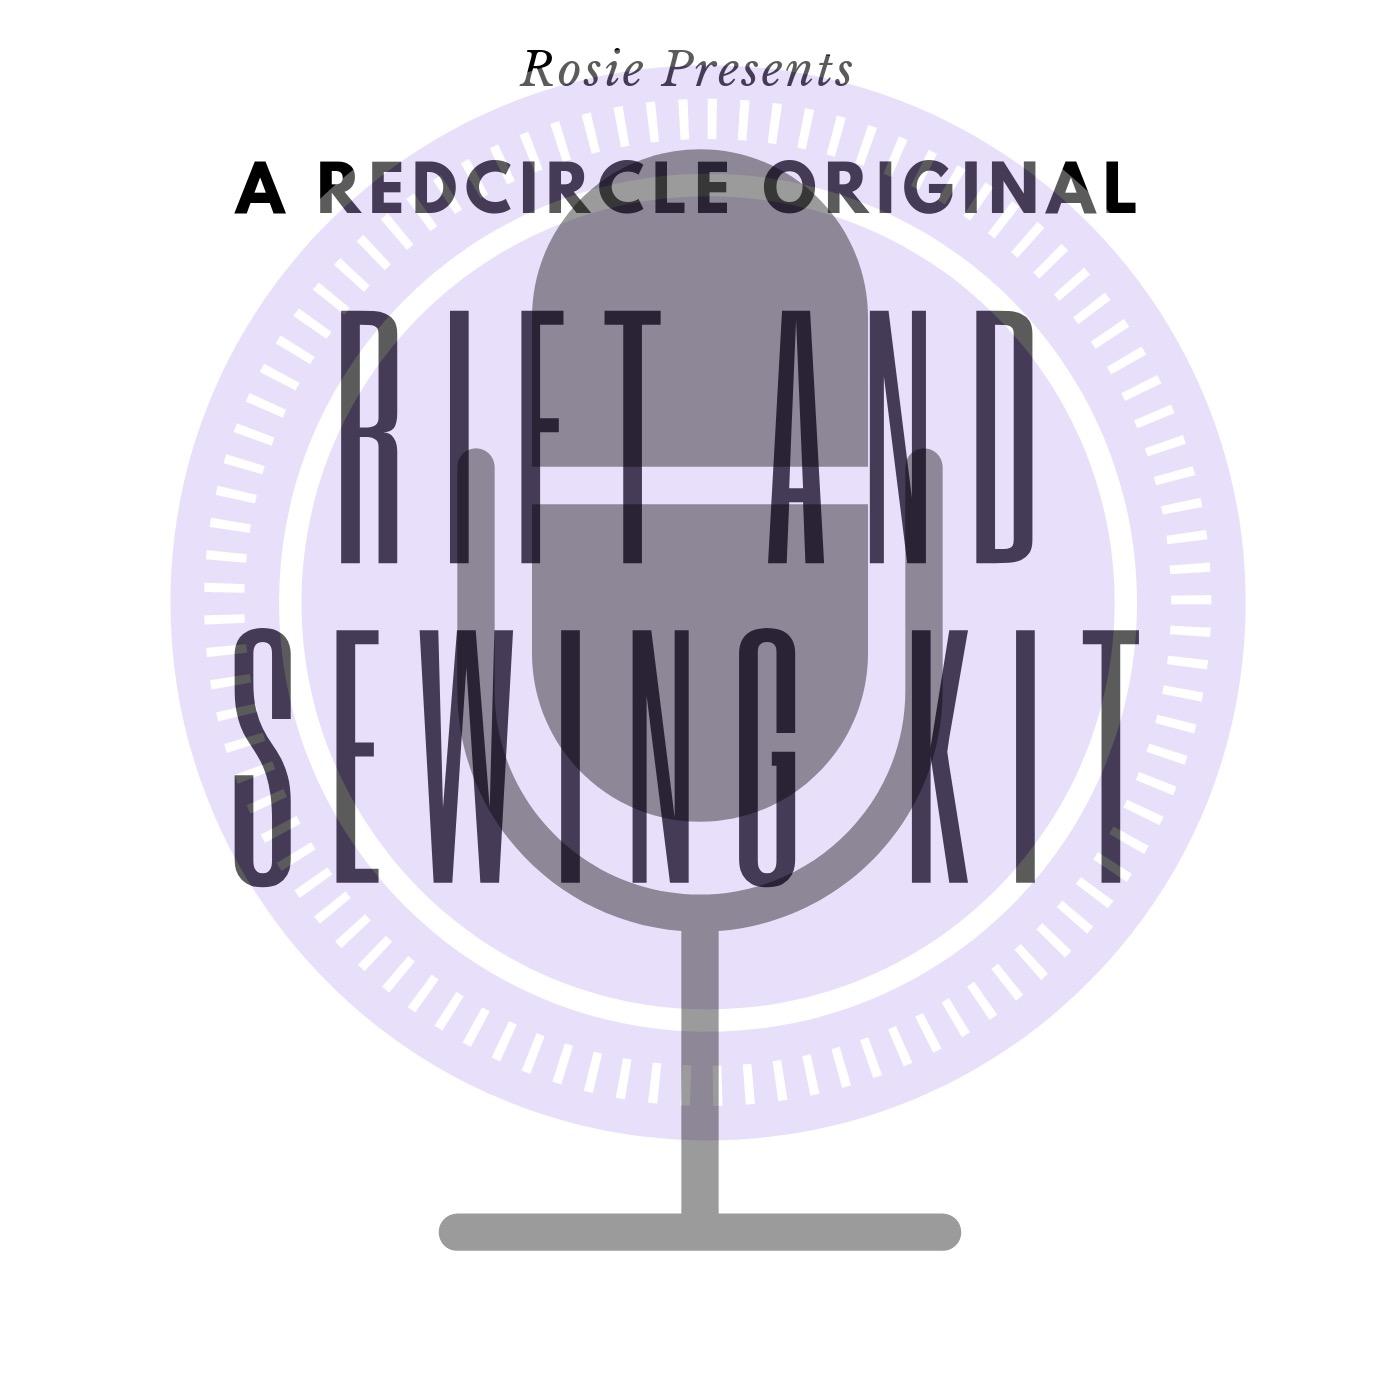 Rift and Sewing Kit